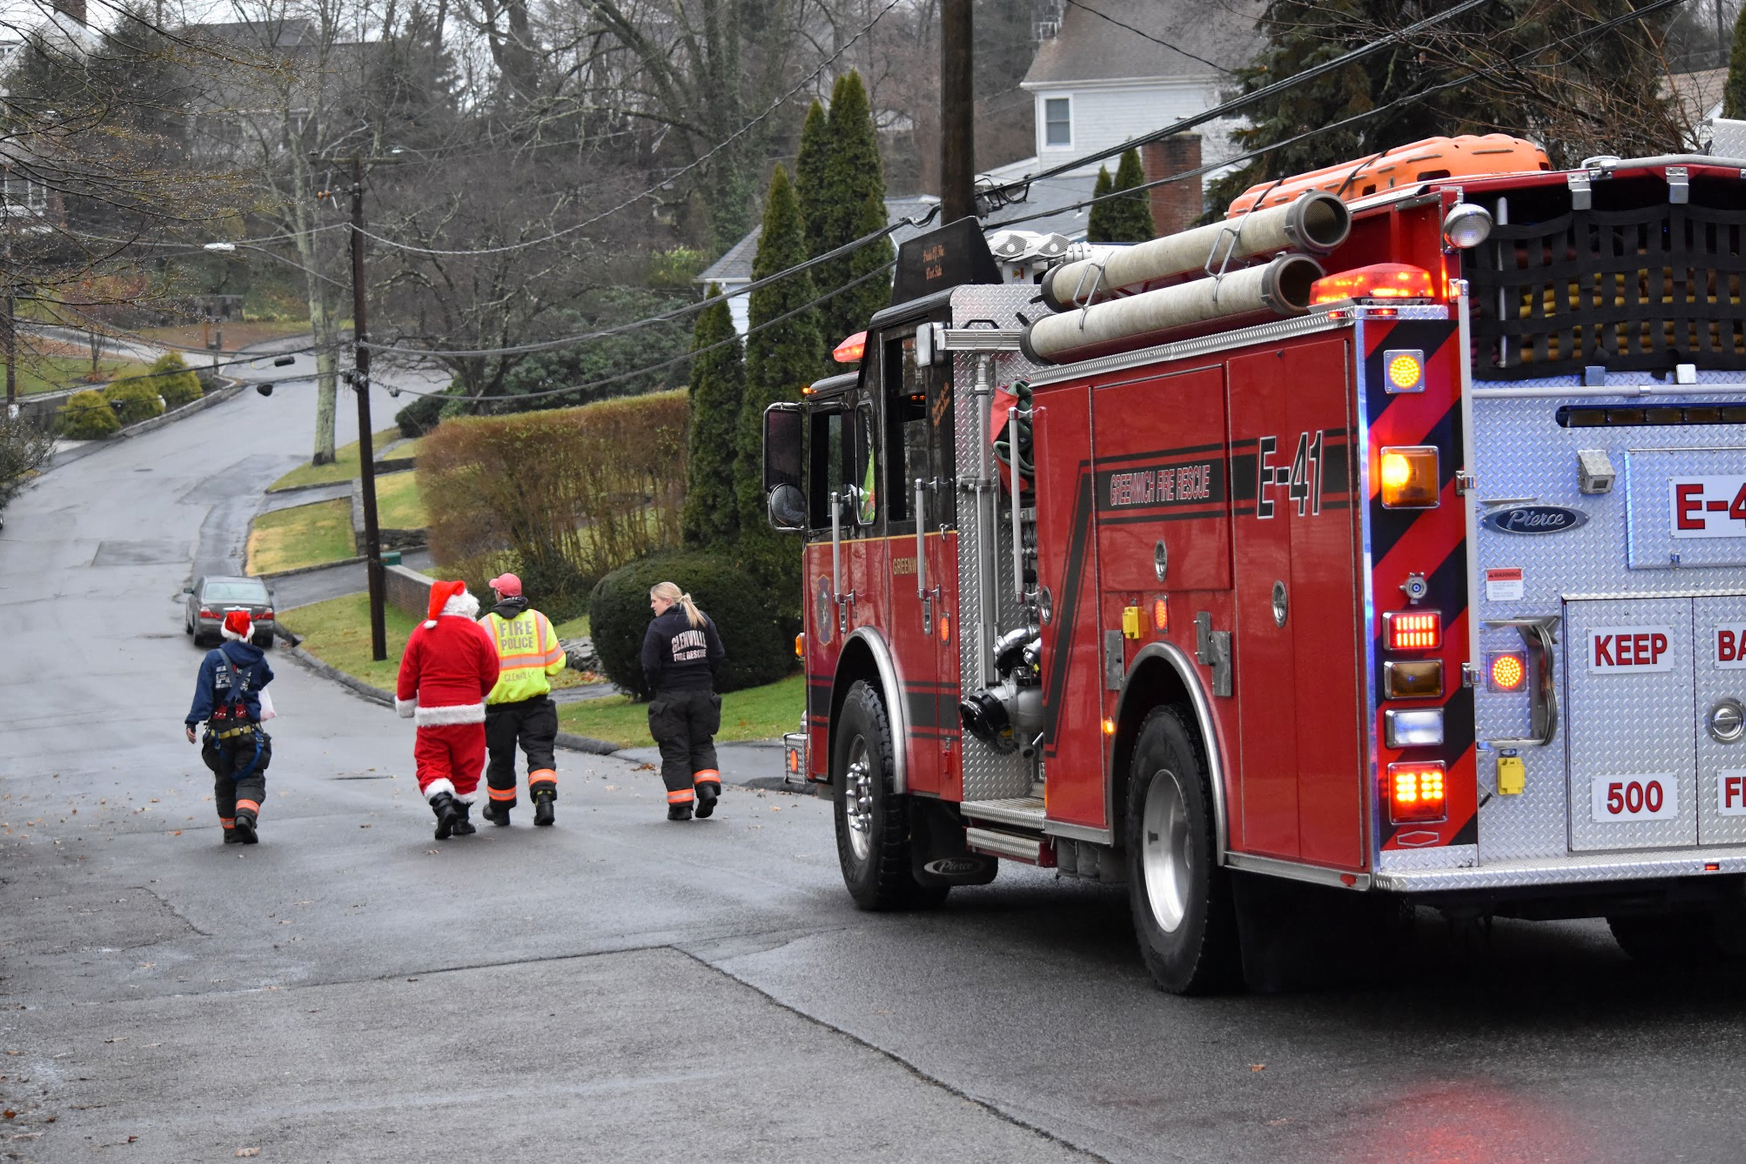 Glenville Volunteer Fire Co visited families in the community in full uniform along with Santa, music and candy canes. Dec 16, 2018 Photo: Heather Brown Lowthert